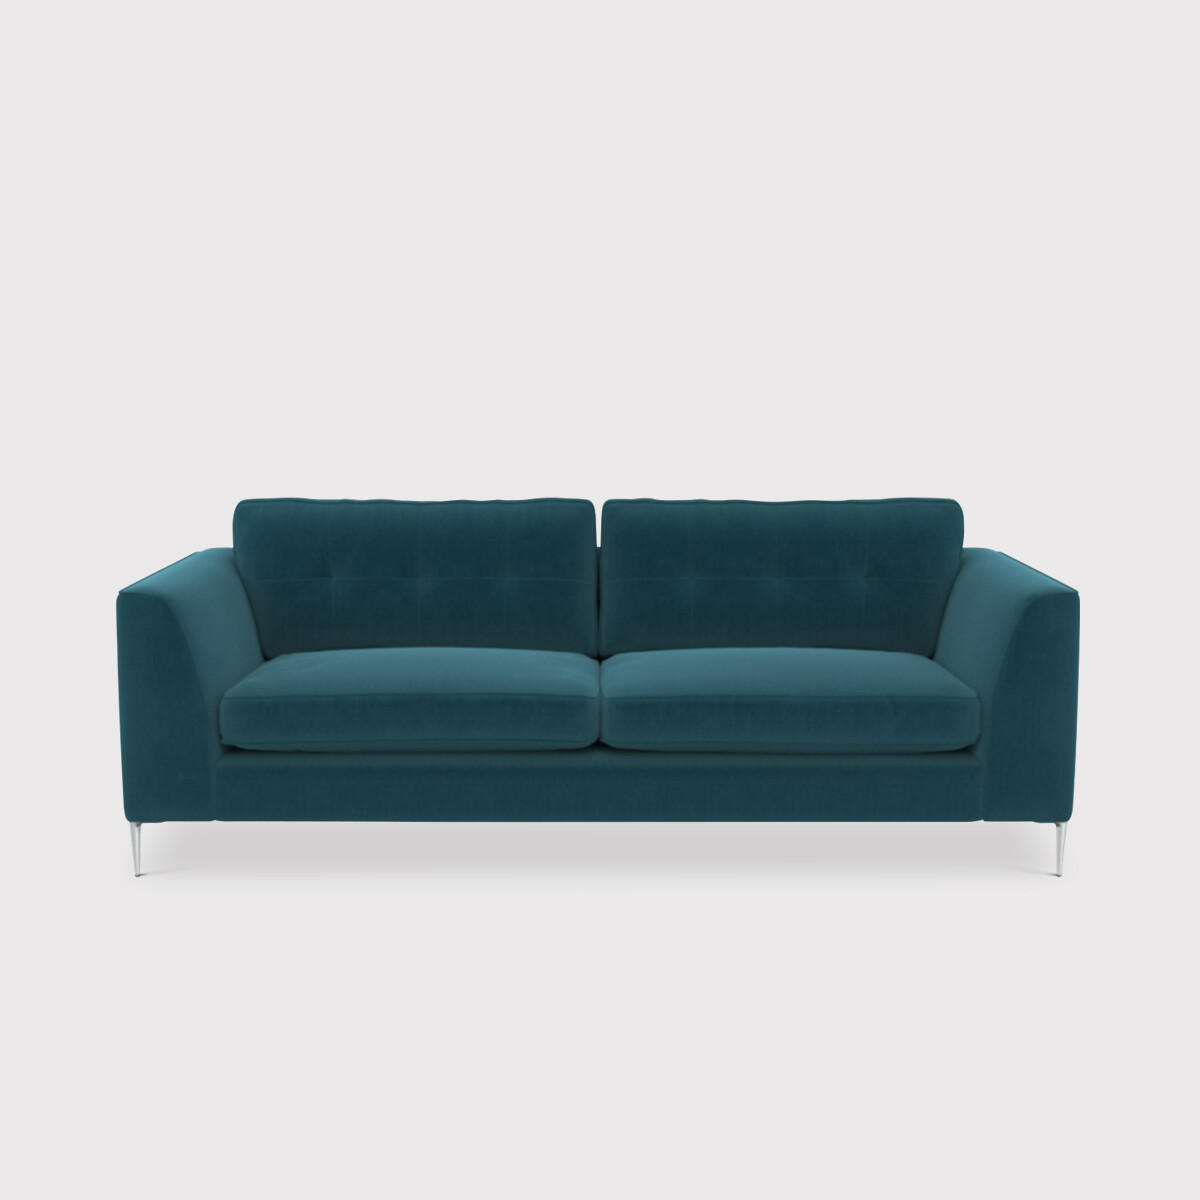 Conza Extra Large Sofa, Teal Fabric | Barker & Stonehouse